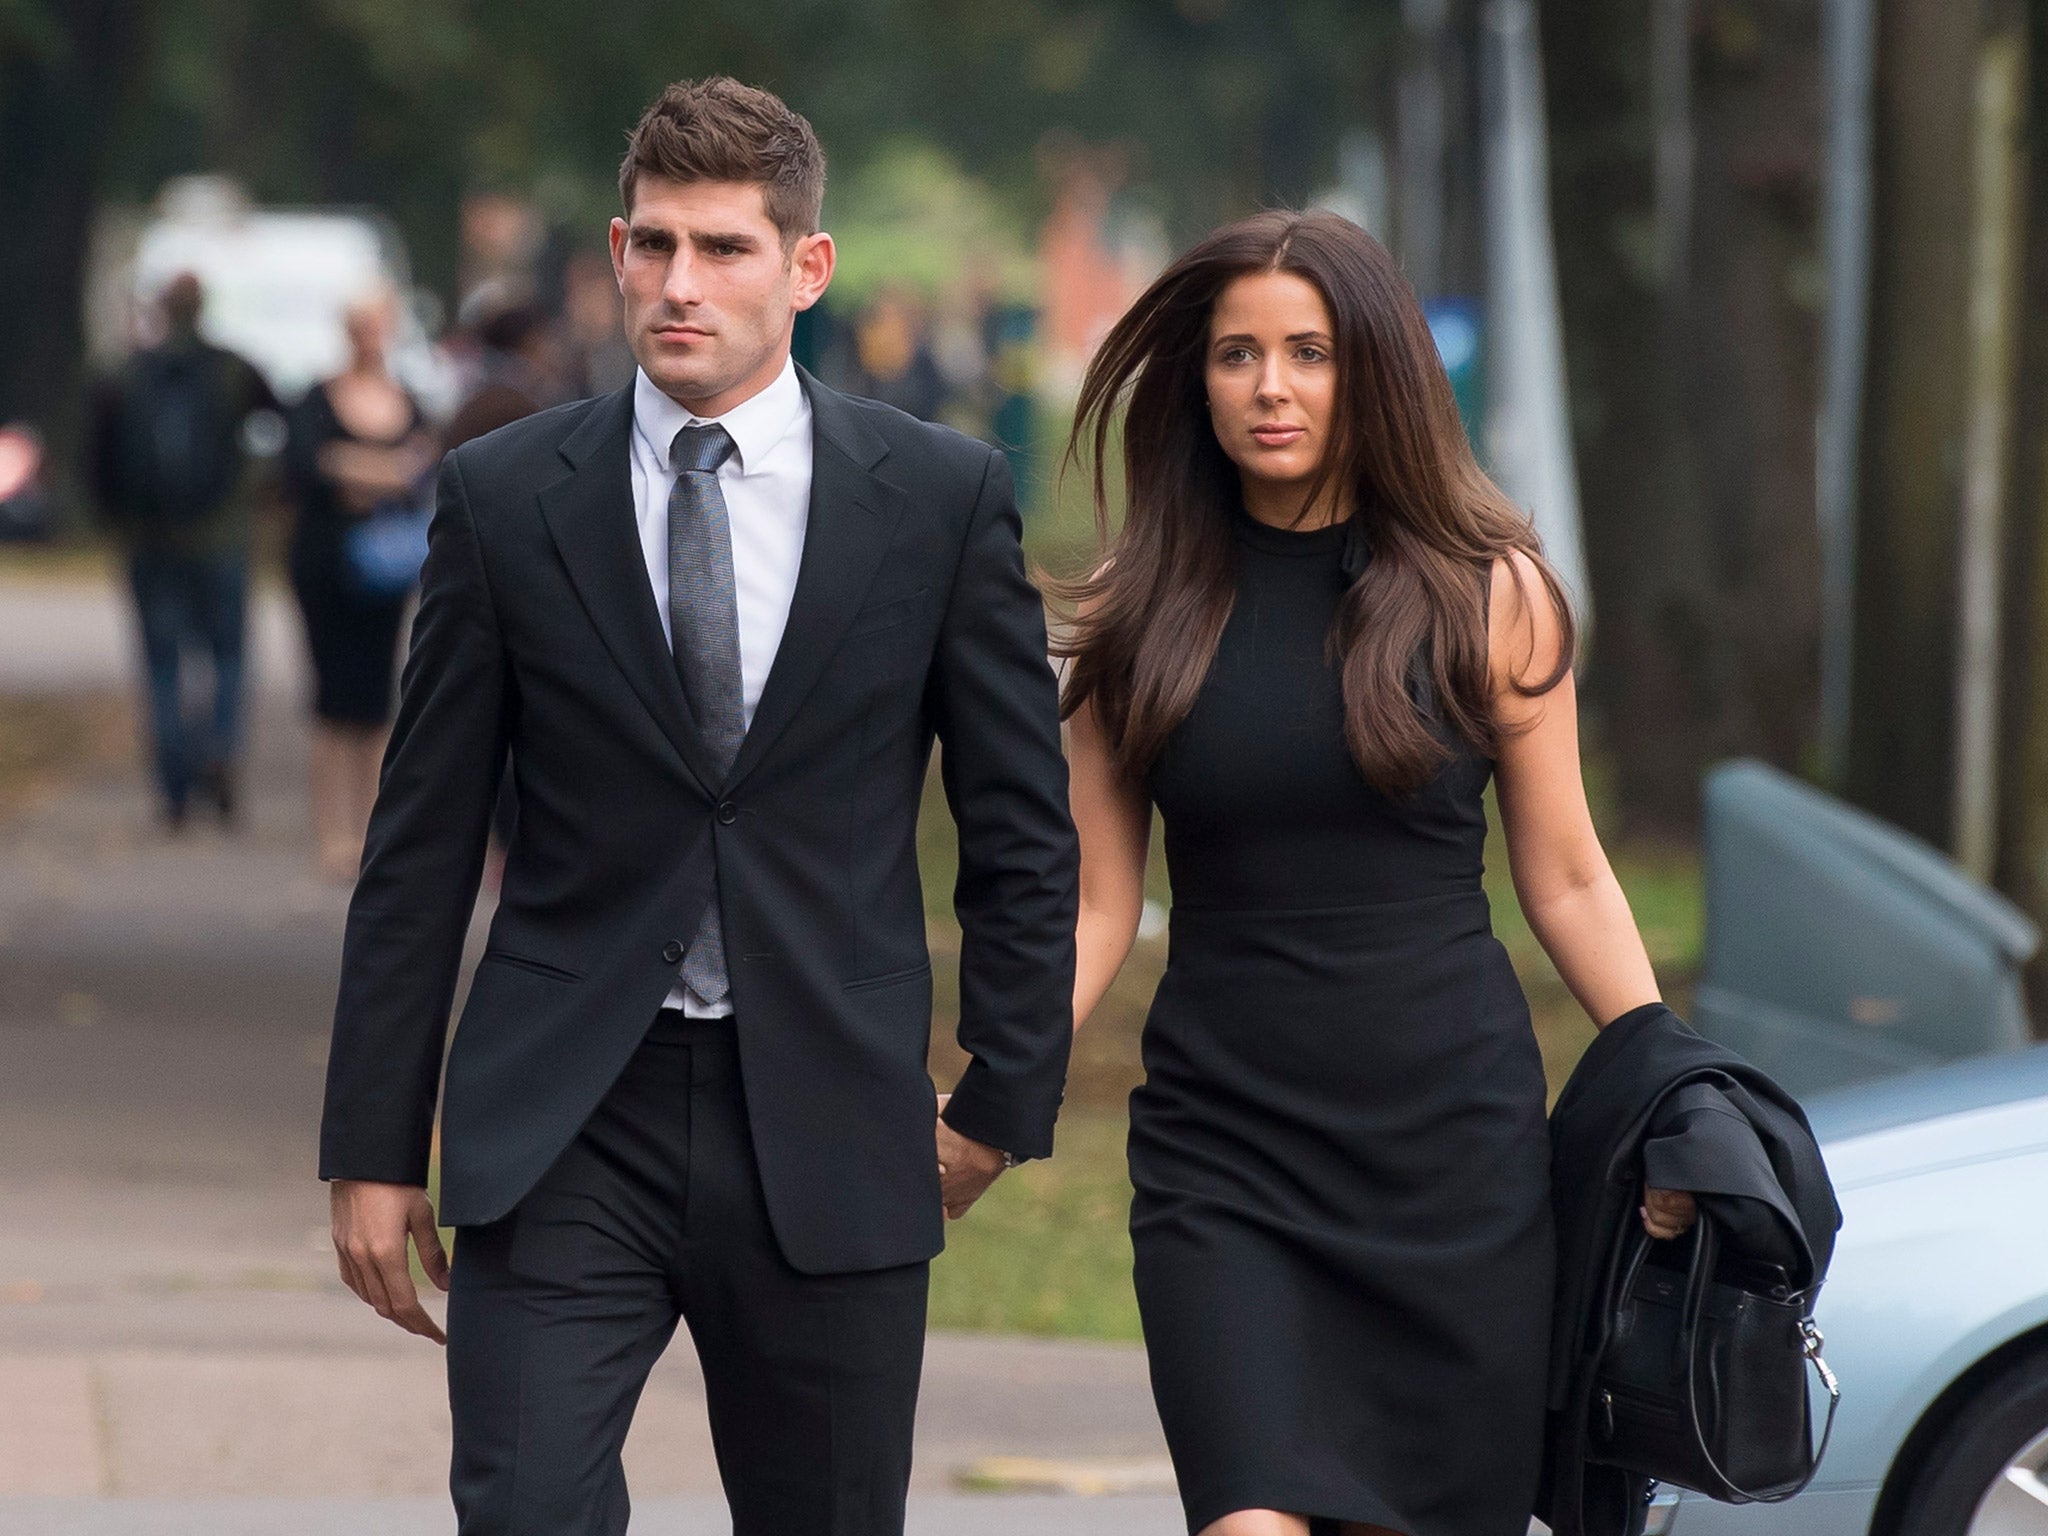 Ched Evans has been found not guilty of raping a 19-year-old woman in 2011